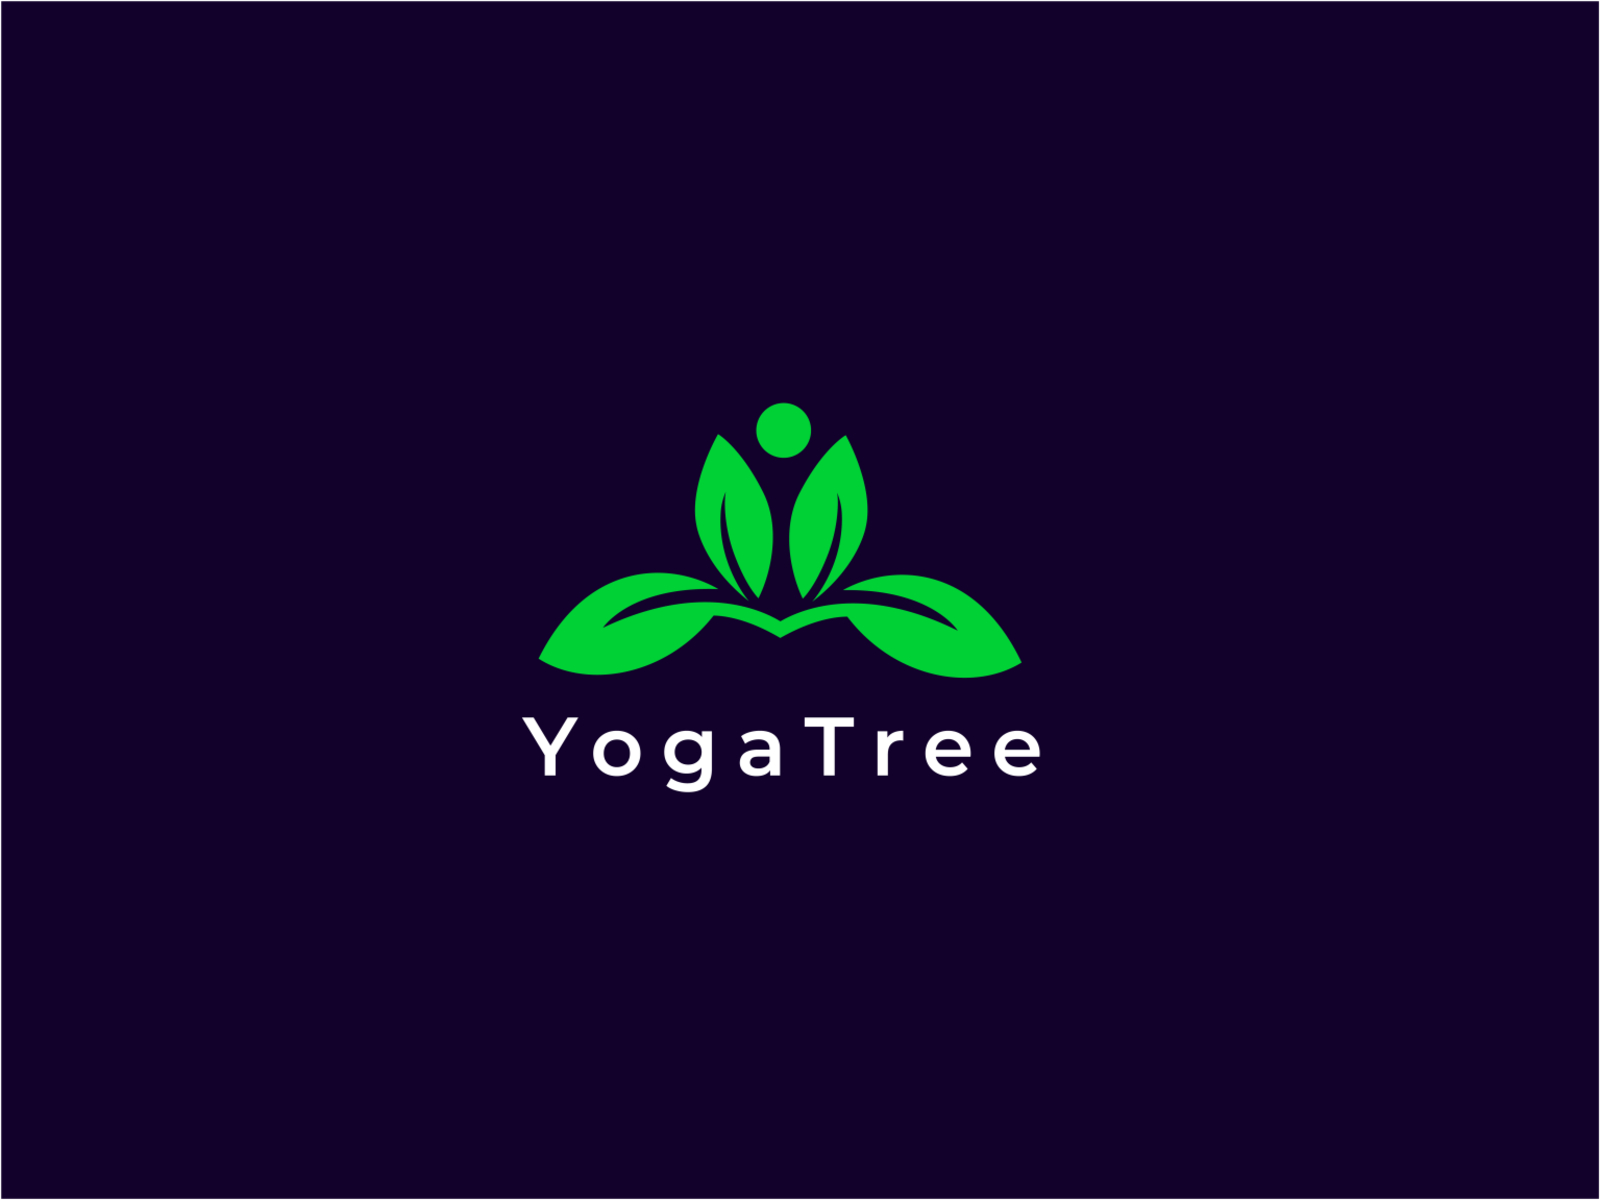 Yogabar Projects :: Photos, videos, logos, illustrations and